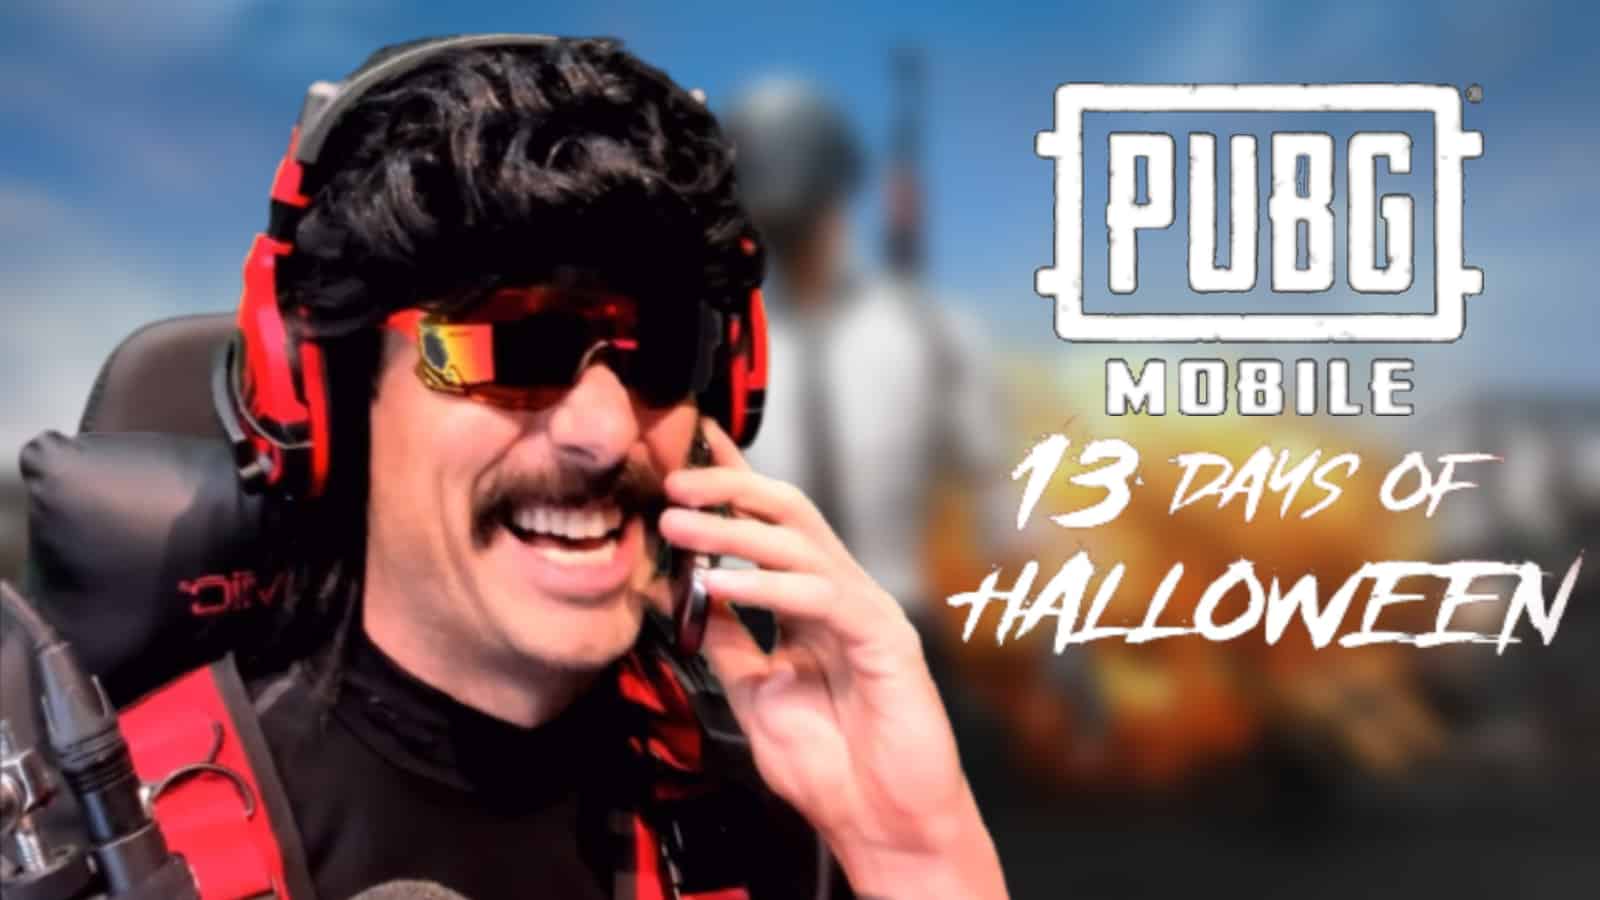 Dr Disrespect joins PUBG Mobile in 13 Days of Halloween event